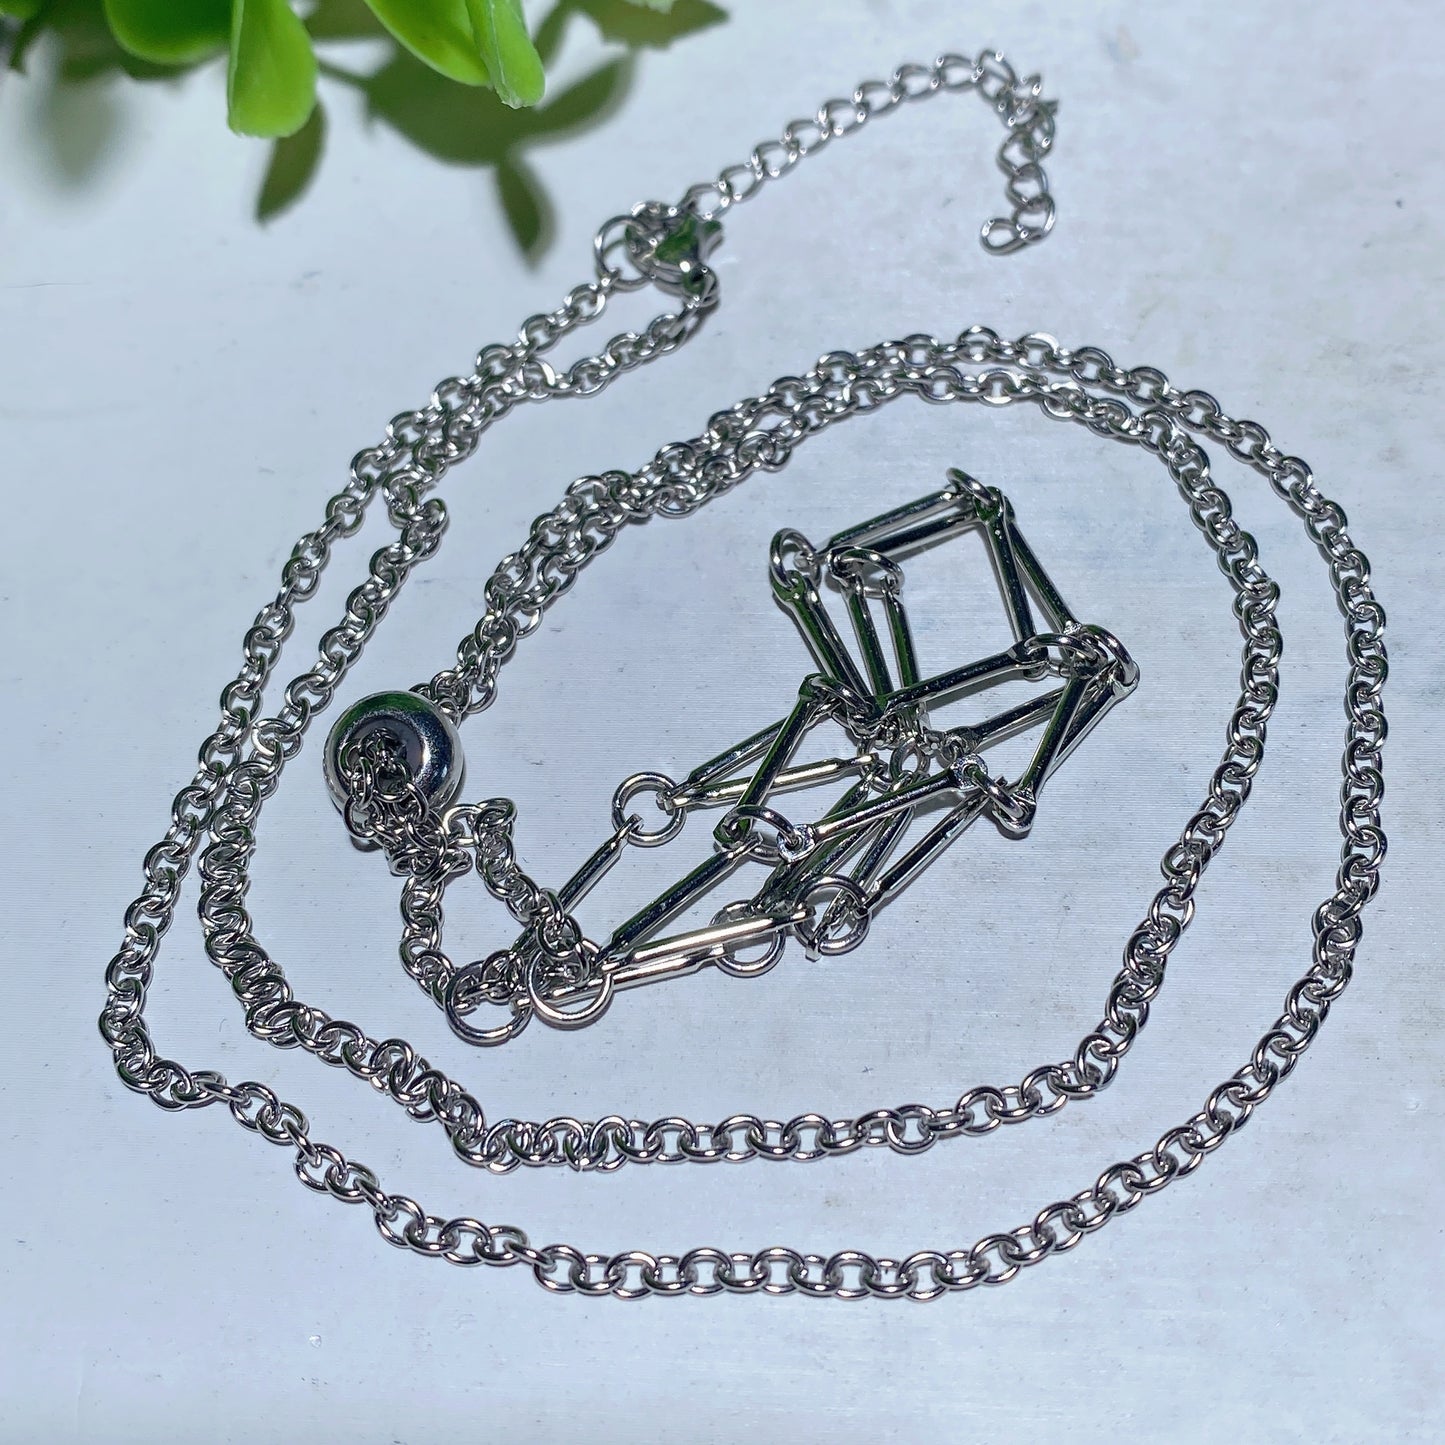 Golden Silver Color Web Design Necklace for Jewelry DIY